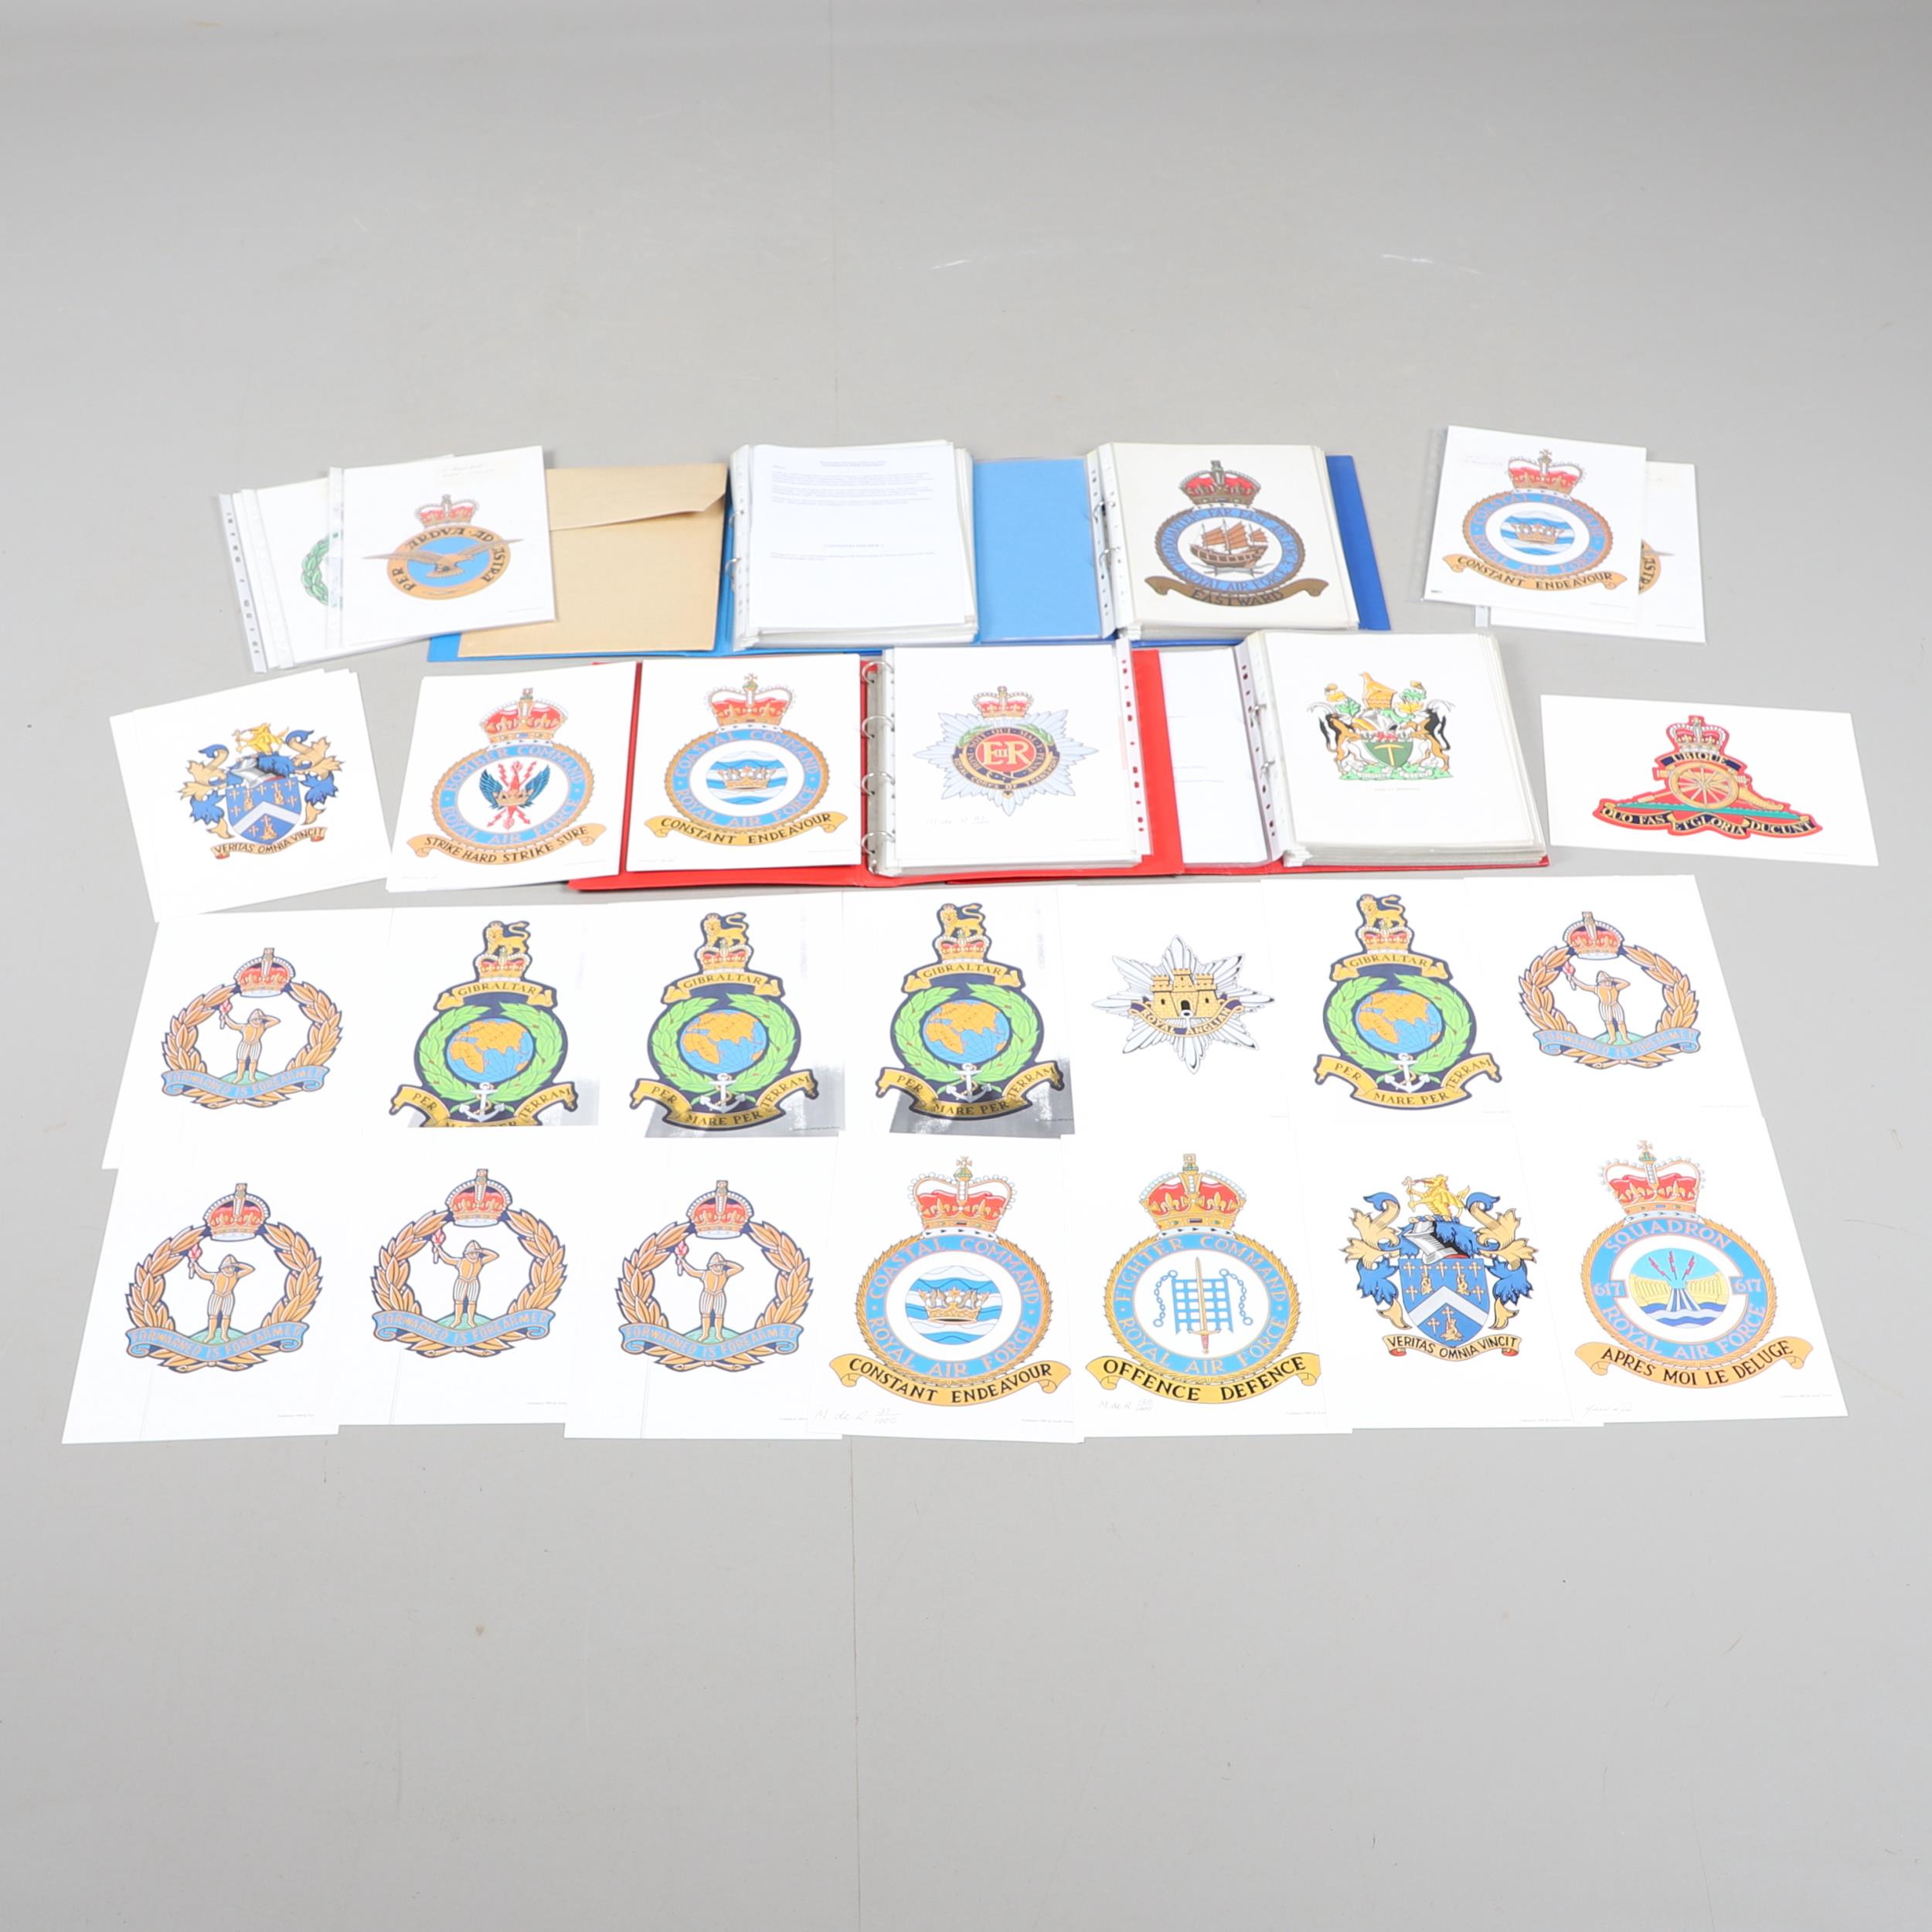 A LARGE COLELCTION OF ARTWORK OF MILITARY CRESTS. IN FOUR ALBUMS AND MANY LOOSE.